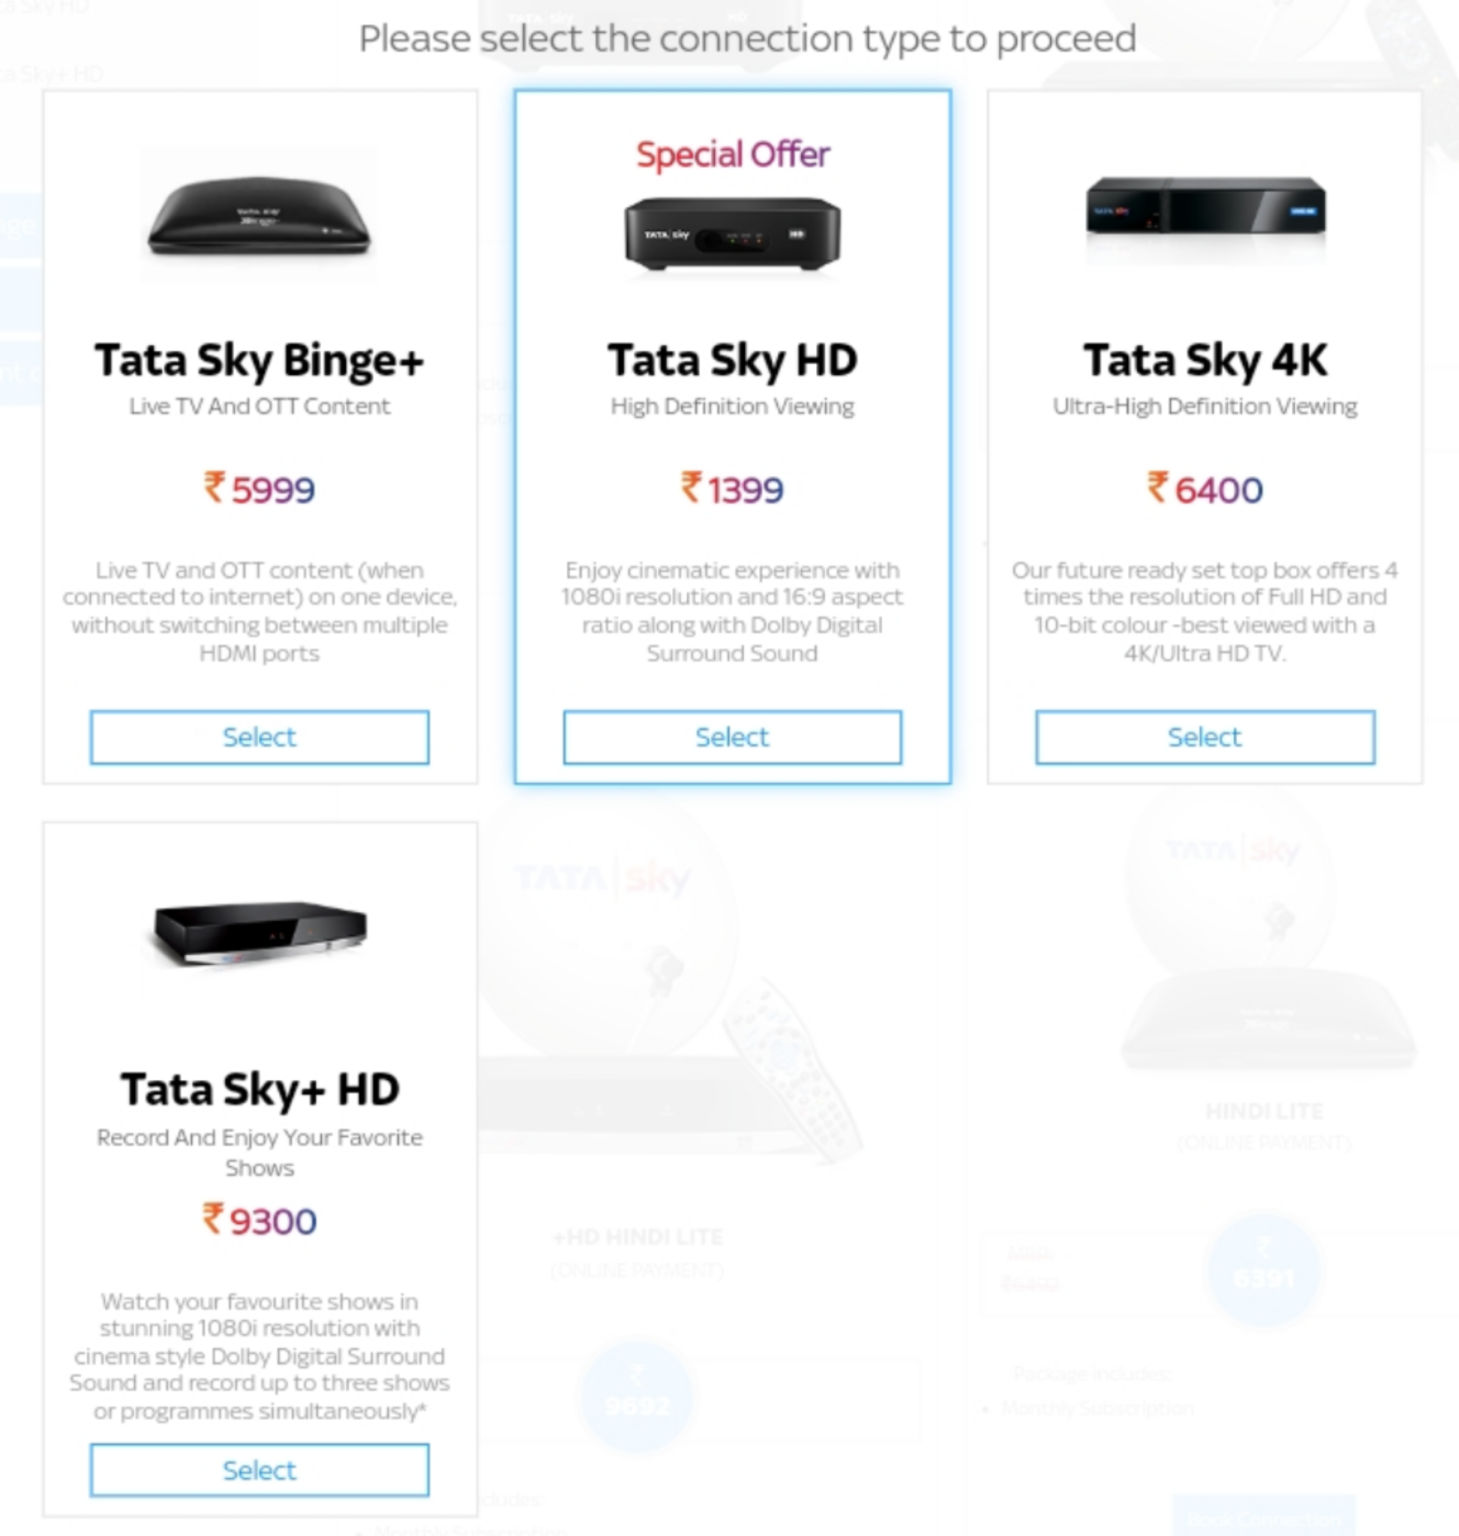 koneksi tata sky sd dihentikan "width =" 1459 "height =" 1536 "srcset =" https://assets.mspimages.in/wp-content/uploads/2020/02/tata-sky-sd-connection-discontinued.png 1459w, https://assets.mspimages.in/wp-content/uploads/2020/02/tata-sky-sd-connection-discontinued-285x300.png 285w, https://assets.mspimages.in/wp-content /uploads/2020/02/tata-sky-sd-connection-discontinued-768x809.png 768w, https://assets.mspimages.in/wp-content/uploads/2020/02/tata-sky-sd-connection- dihentikan-973x1024.png 973w, https://assets.mspimages.in/wp-content/uploads/2020/02/tata-sky-sd-connection-discontinued-696x733.png 696w, https: //assets.mspimages. di / wp-content / uploads / 2020/02 / tata-sky-sd-connection-discontinued-1068x1124.png 1068w, https://assets.mspimages.in/wp-content/uploads/2020/02/tata-sky -sd-connection-discontinued-399x420.png 399w, https://assets.mspimages.in/wp-content/uploads/2020/02/tata-sky-sd-connection-discontinued-47x50.png 47w "size =" (lebar maks: 1459px) 100vw, 1459px